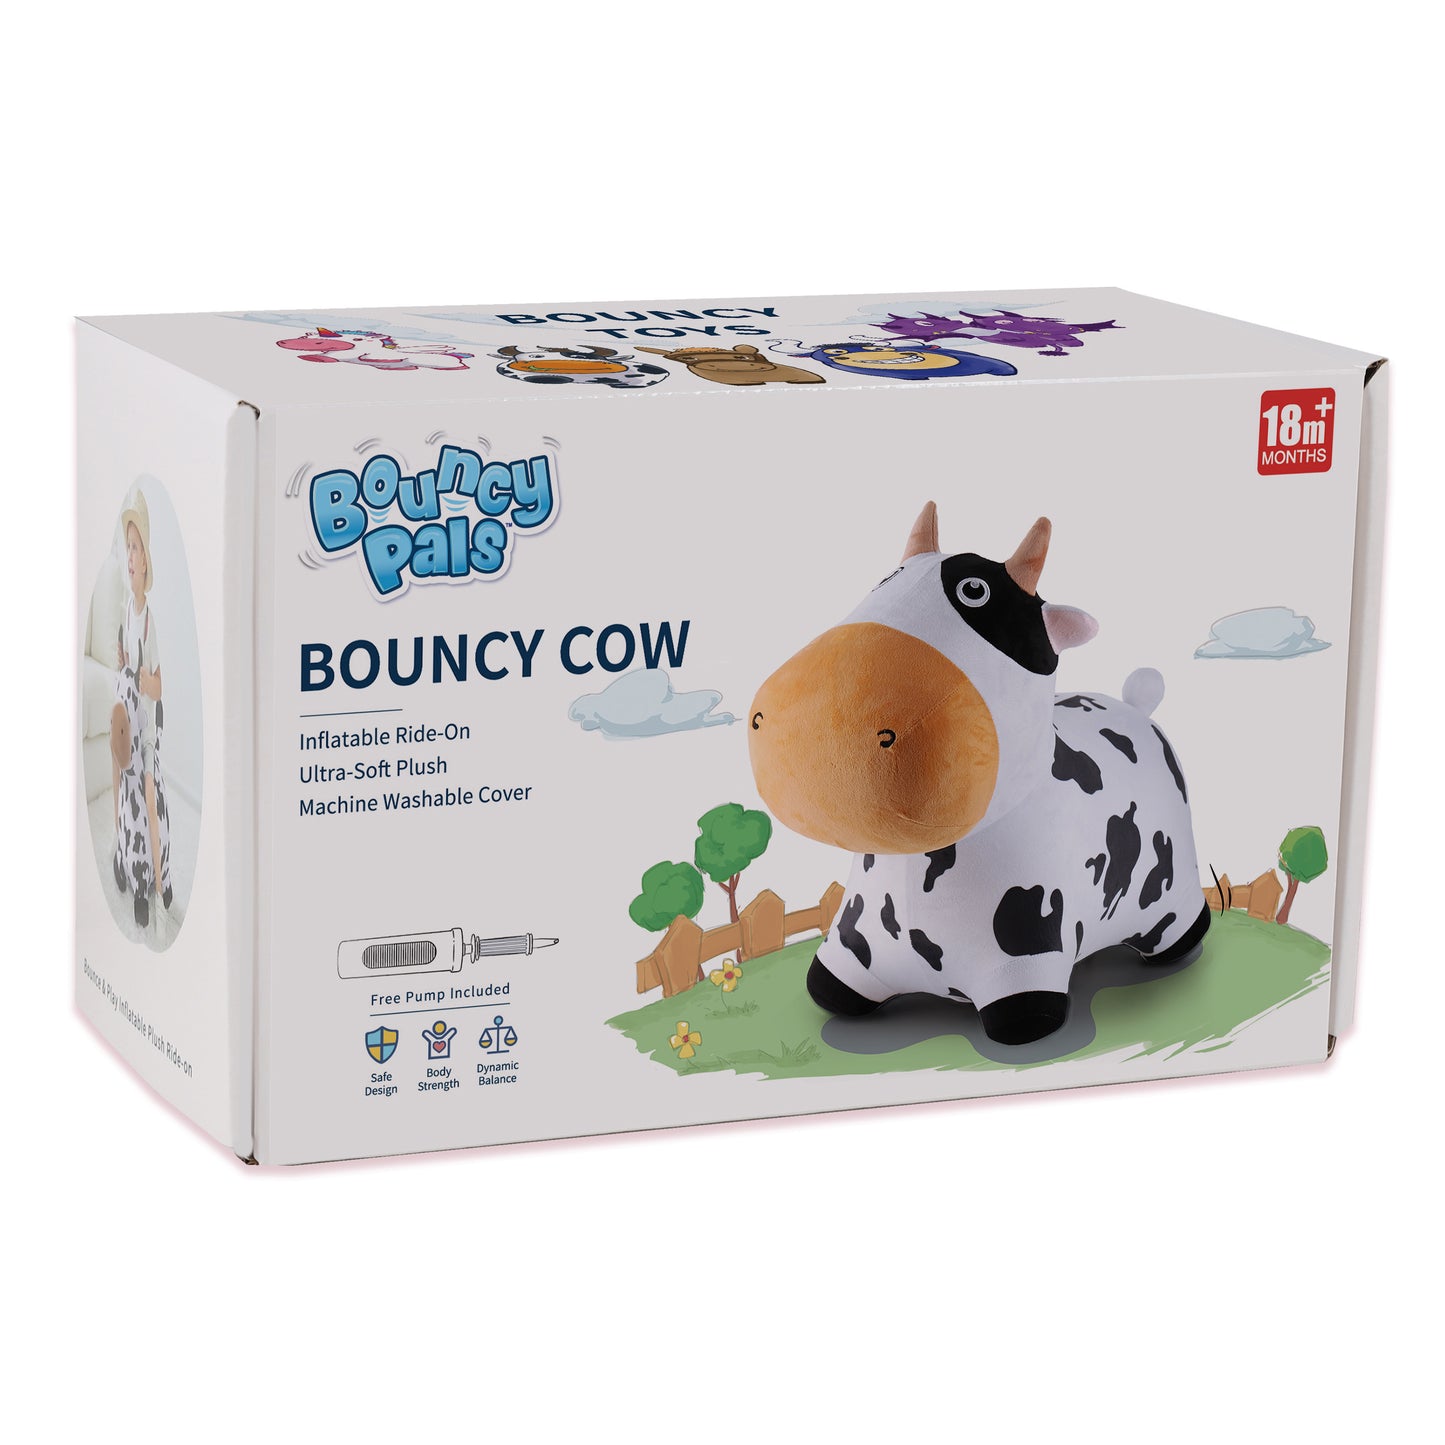 BOUNCY DAIRY COW